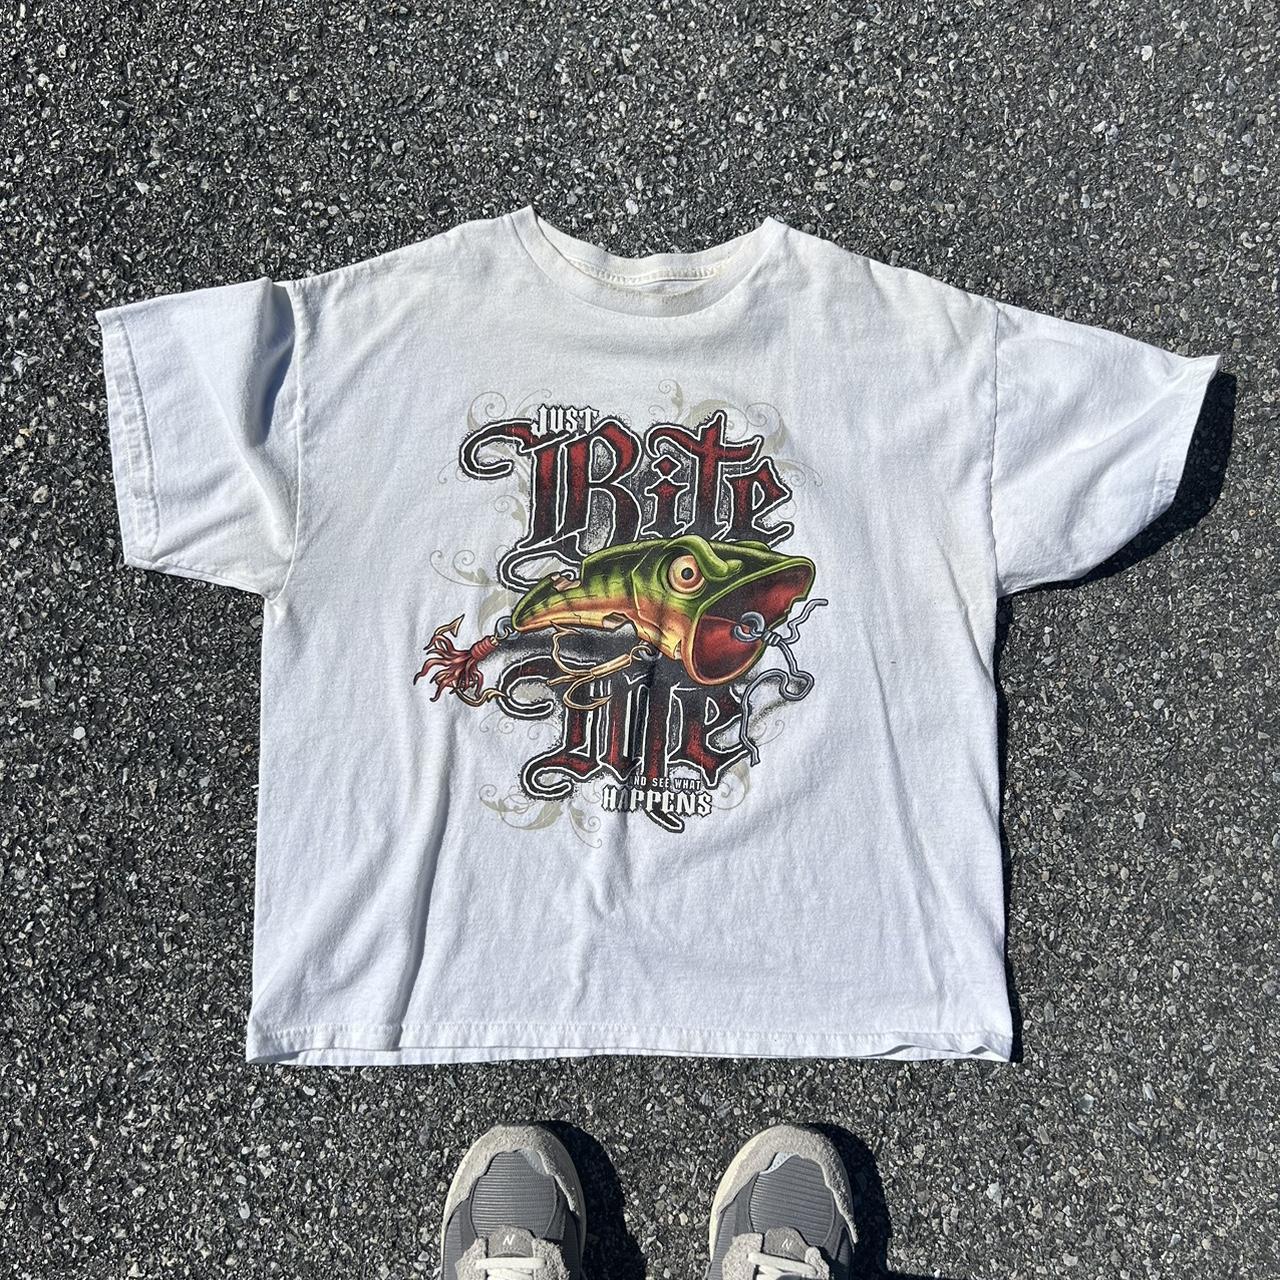 Very unique vintage fishing shirt very cool graphic - Depop